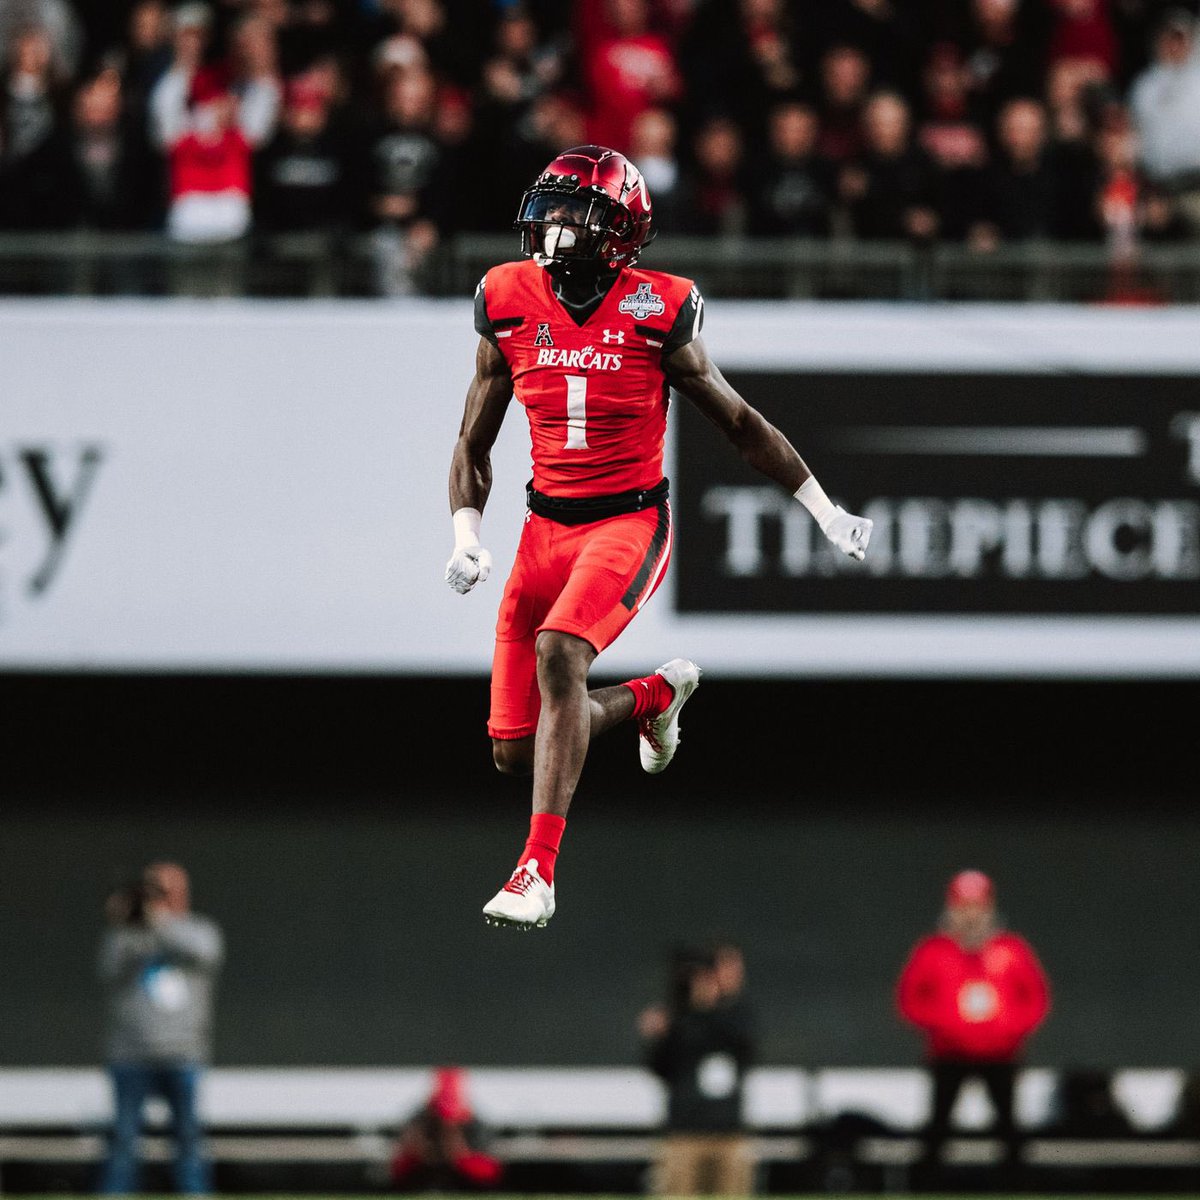 Beyond Blessed And Honored To Receive An Offer From the University of Cincinnati @CoachB_BROWN @DeRailSims @GoBEARCATS @UC_Recruiting @EvanshsFootball @CoachKLang @A_G_Waseem @Andrew_Ivins @KiddRyno_Rivals @Bearcats247